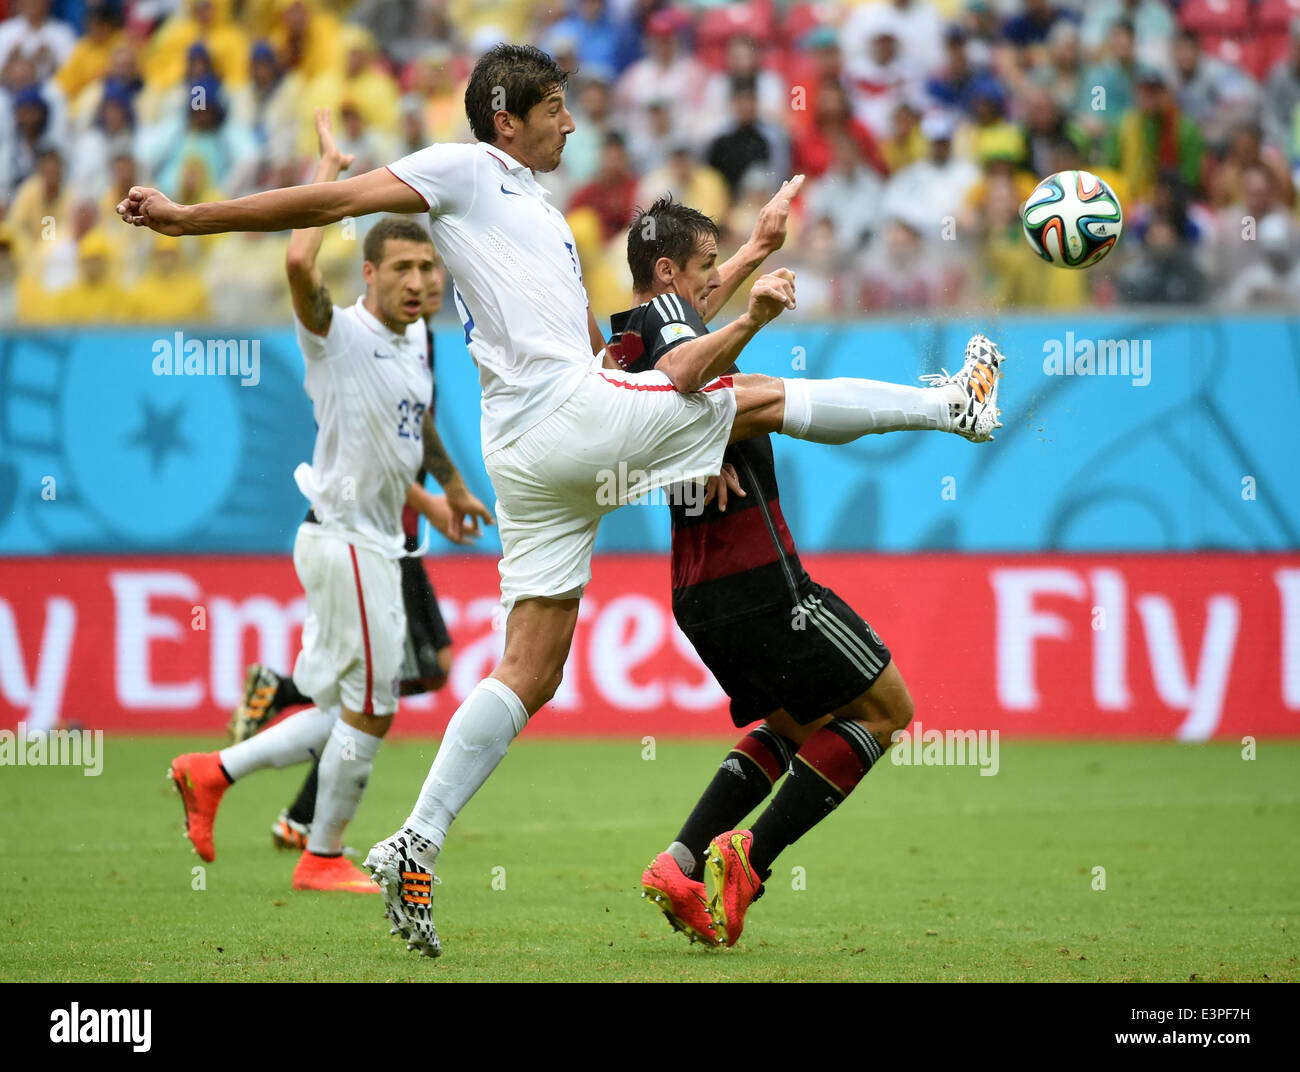 Recife, Brazil. 26th June, 2014. Omar Gonzalez (L, front) of the U.S. vies with Germany's Miroslav Klose (R, front) during a Group G match between the U.S. and Germany of 2014 FIFA World Cup at the Arena Pernambuco Stadium in Recife, Brazil, on June 26, 2014. Germany won 1-0 over the U.S. on Thursday. Germany and the U.S. enter Round of 16 from Group G. Credit:  Guo Yong/Xinhua/Alamy Live News Stock Photo